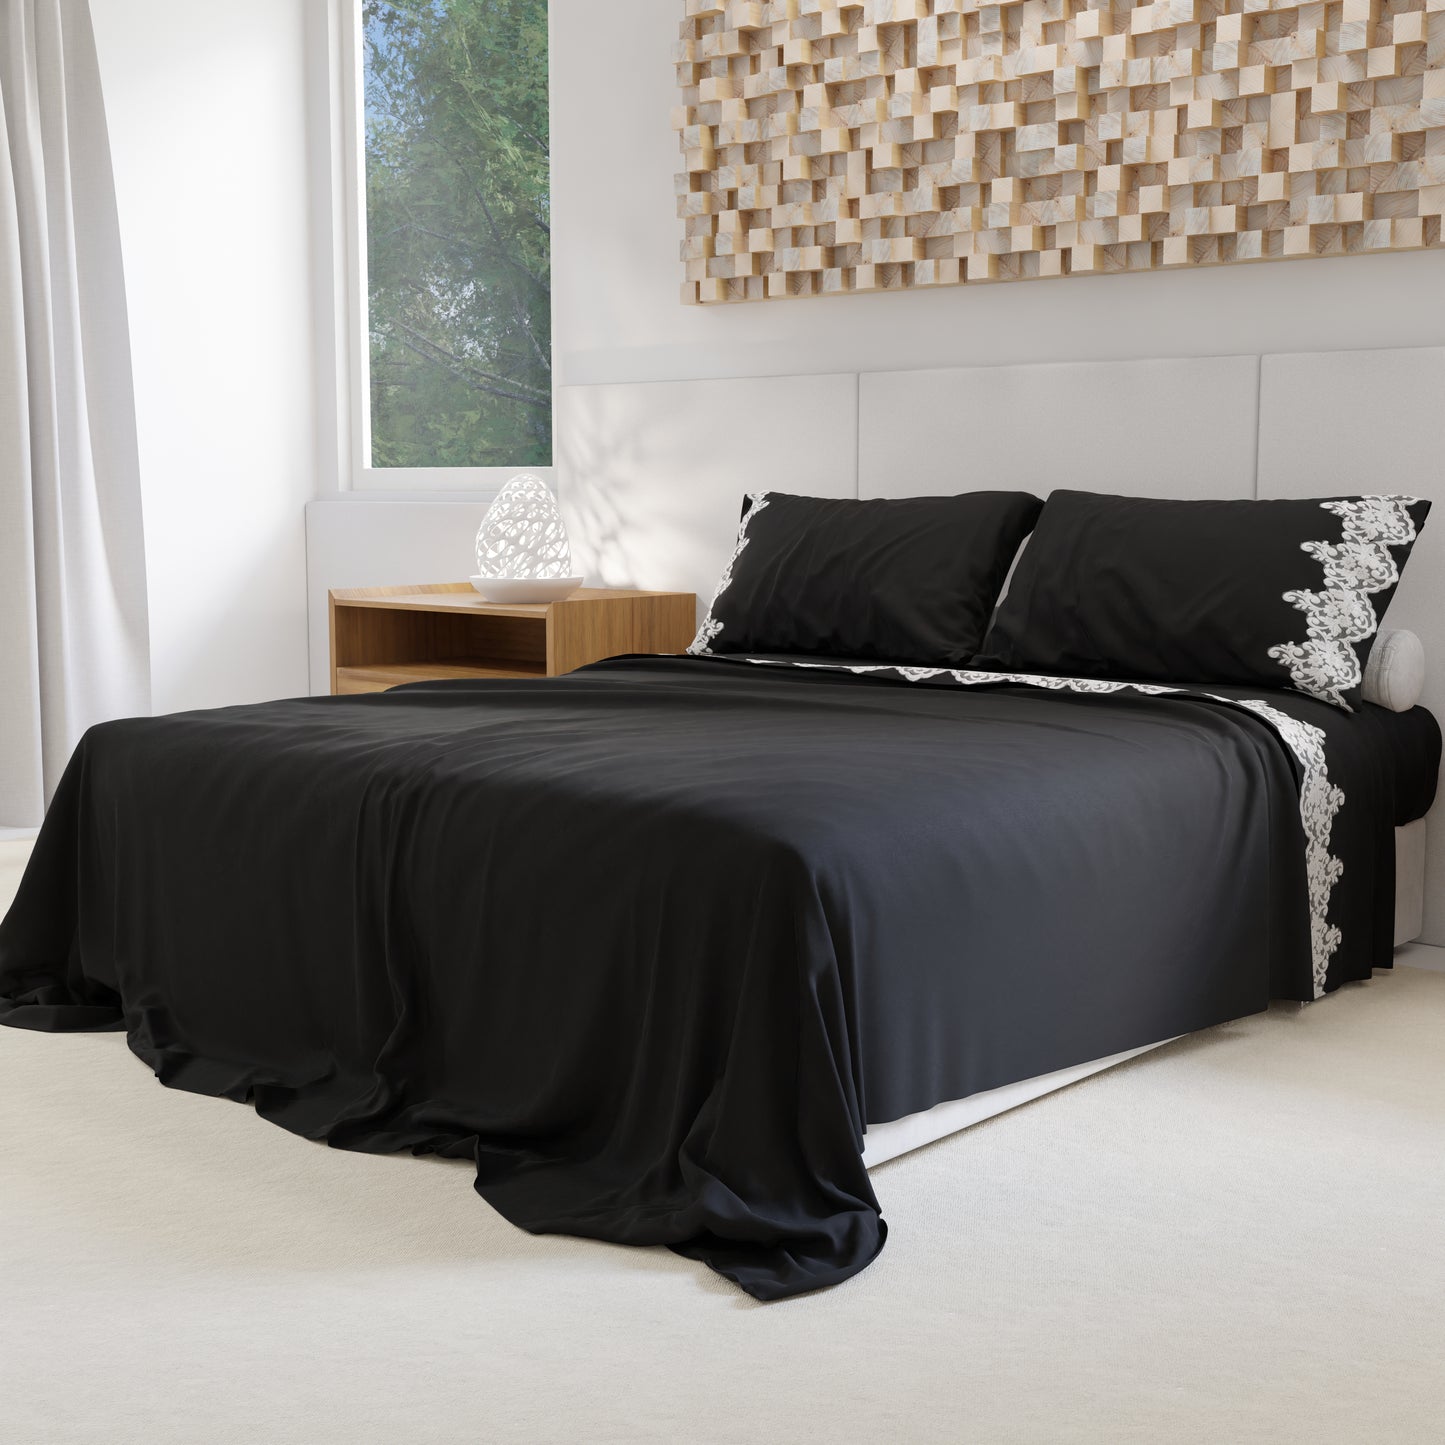 Percale Sheets with Lace, Black Cotton Double Sheets